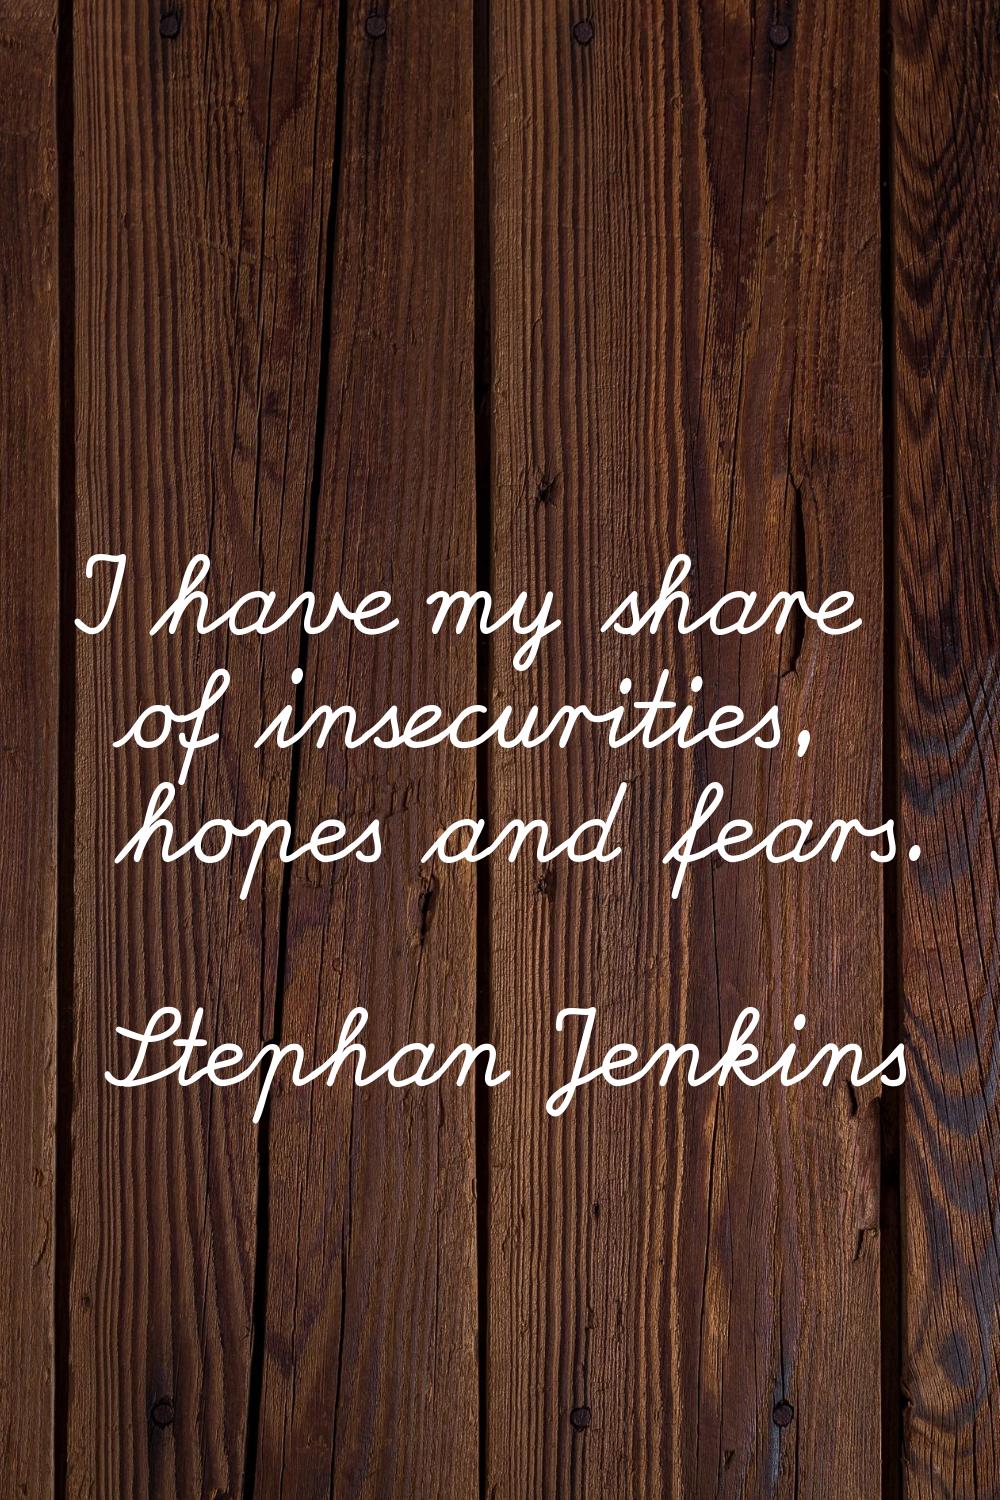 I have my share of insecurities, hopes and fears.